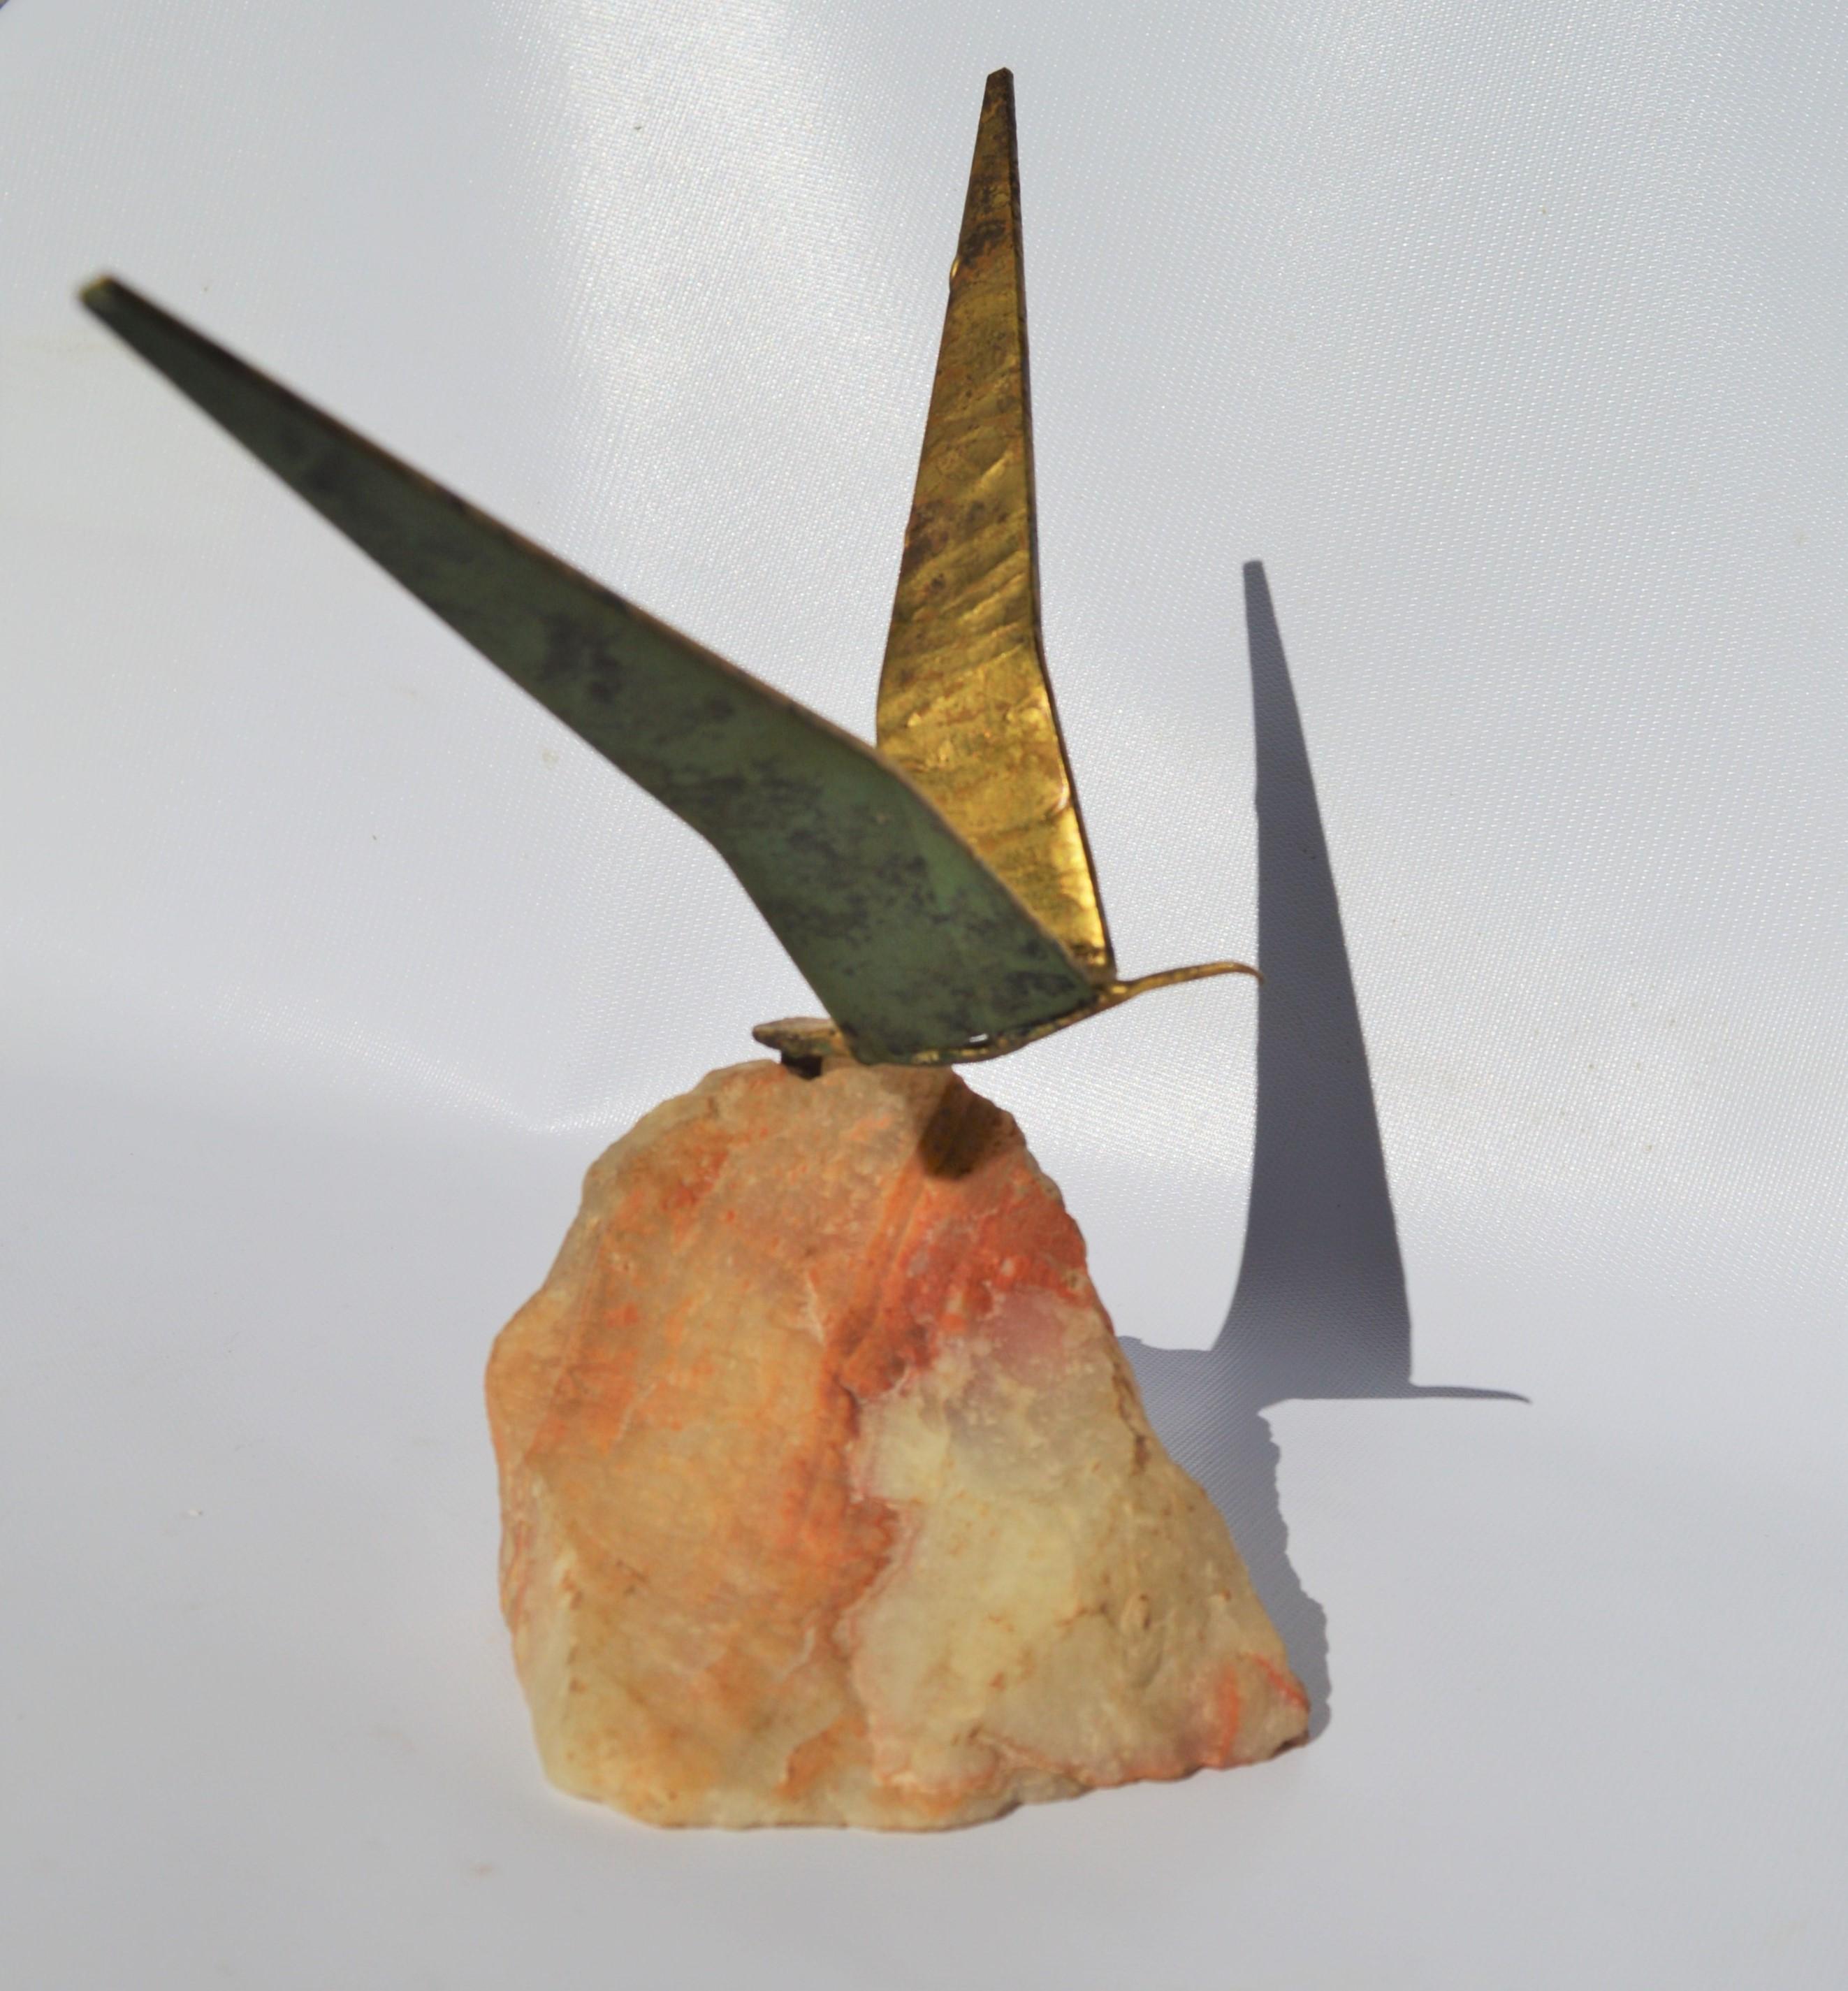 This delightful Curtis Jere original Brutalist brass bird in flight is Minimalist and striking - and casts beautiful shadows. The brass contrasts beautifully with the quartz plinth base. Signed by the artist and dated 1968 on the and in excellent